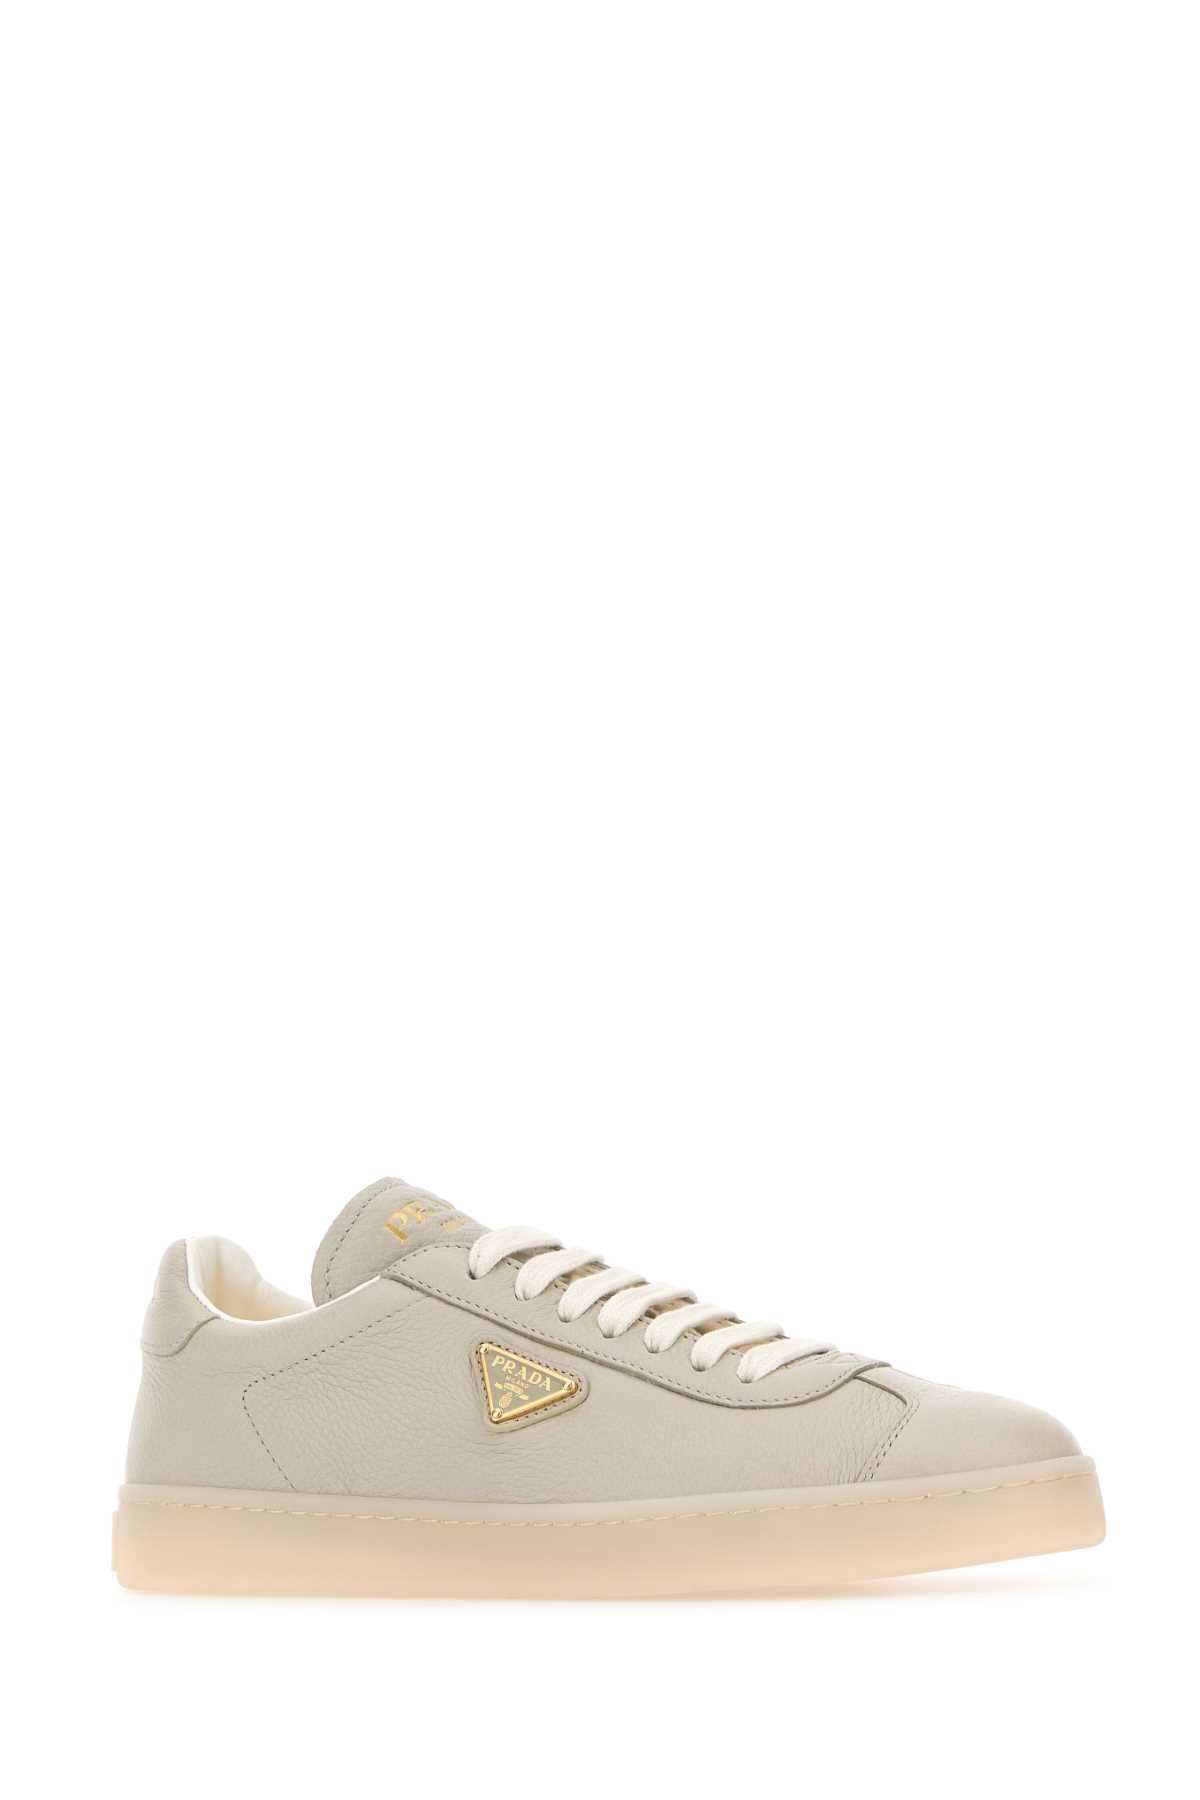 Prada Sand Leather Downtown Sneakers In Pomice